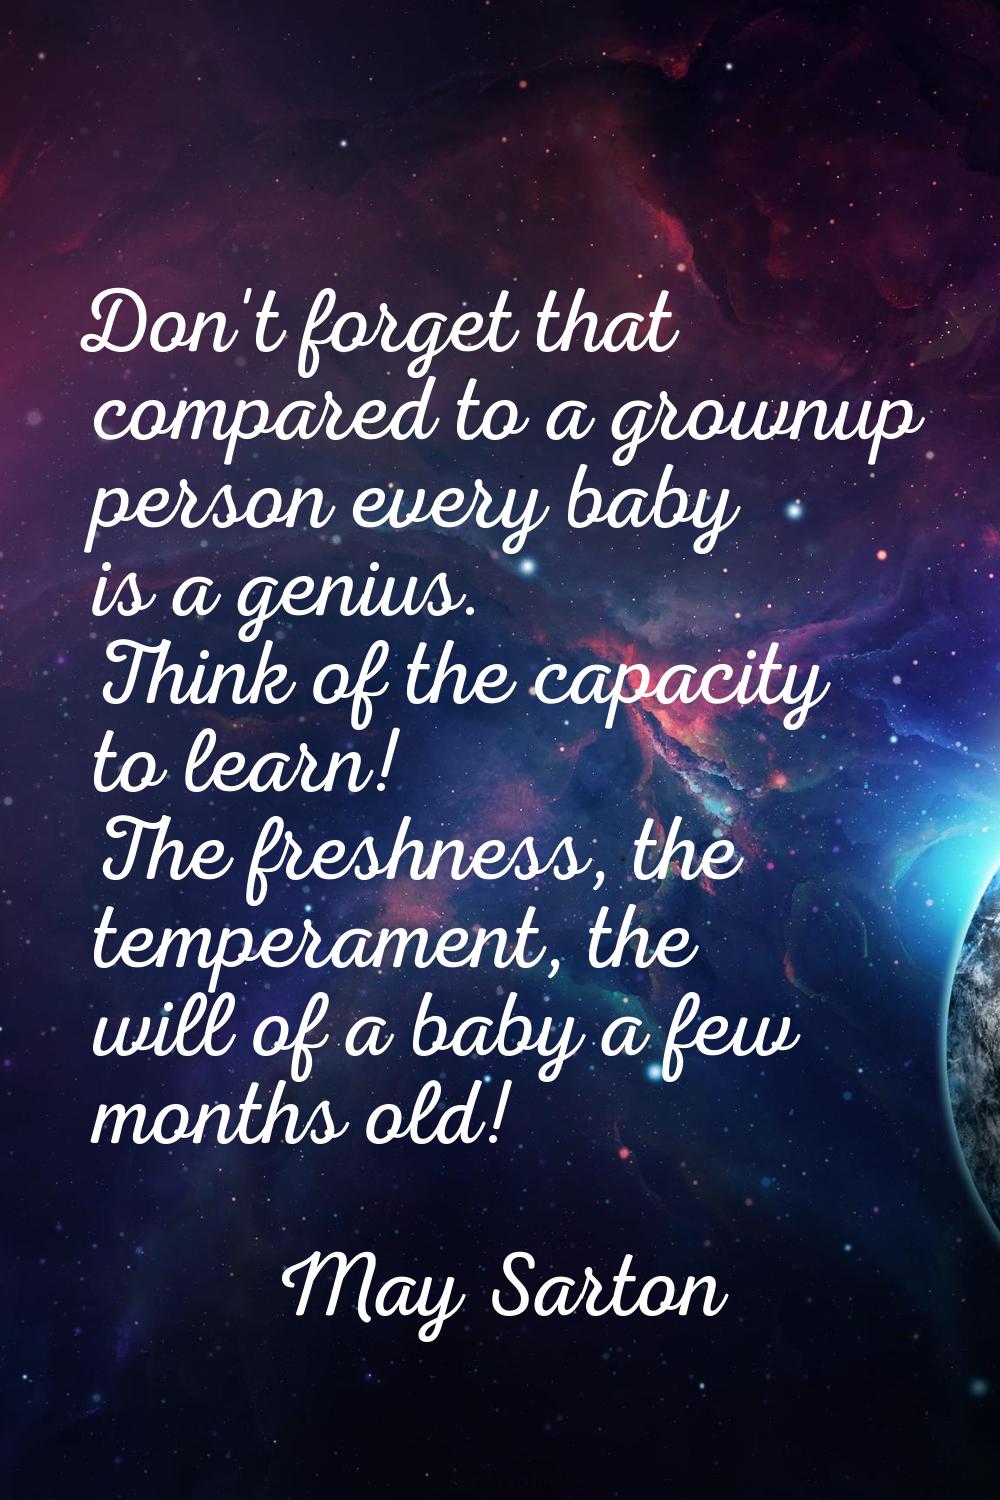 Don't forget that compared to a grownup person every baby is a genius. Think of the capacity to lea